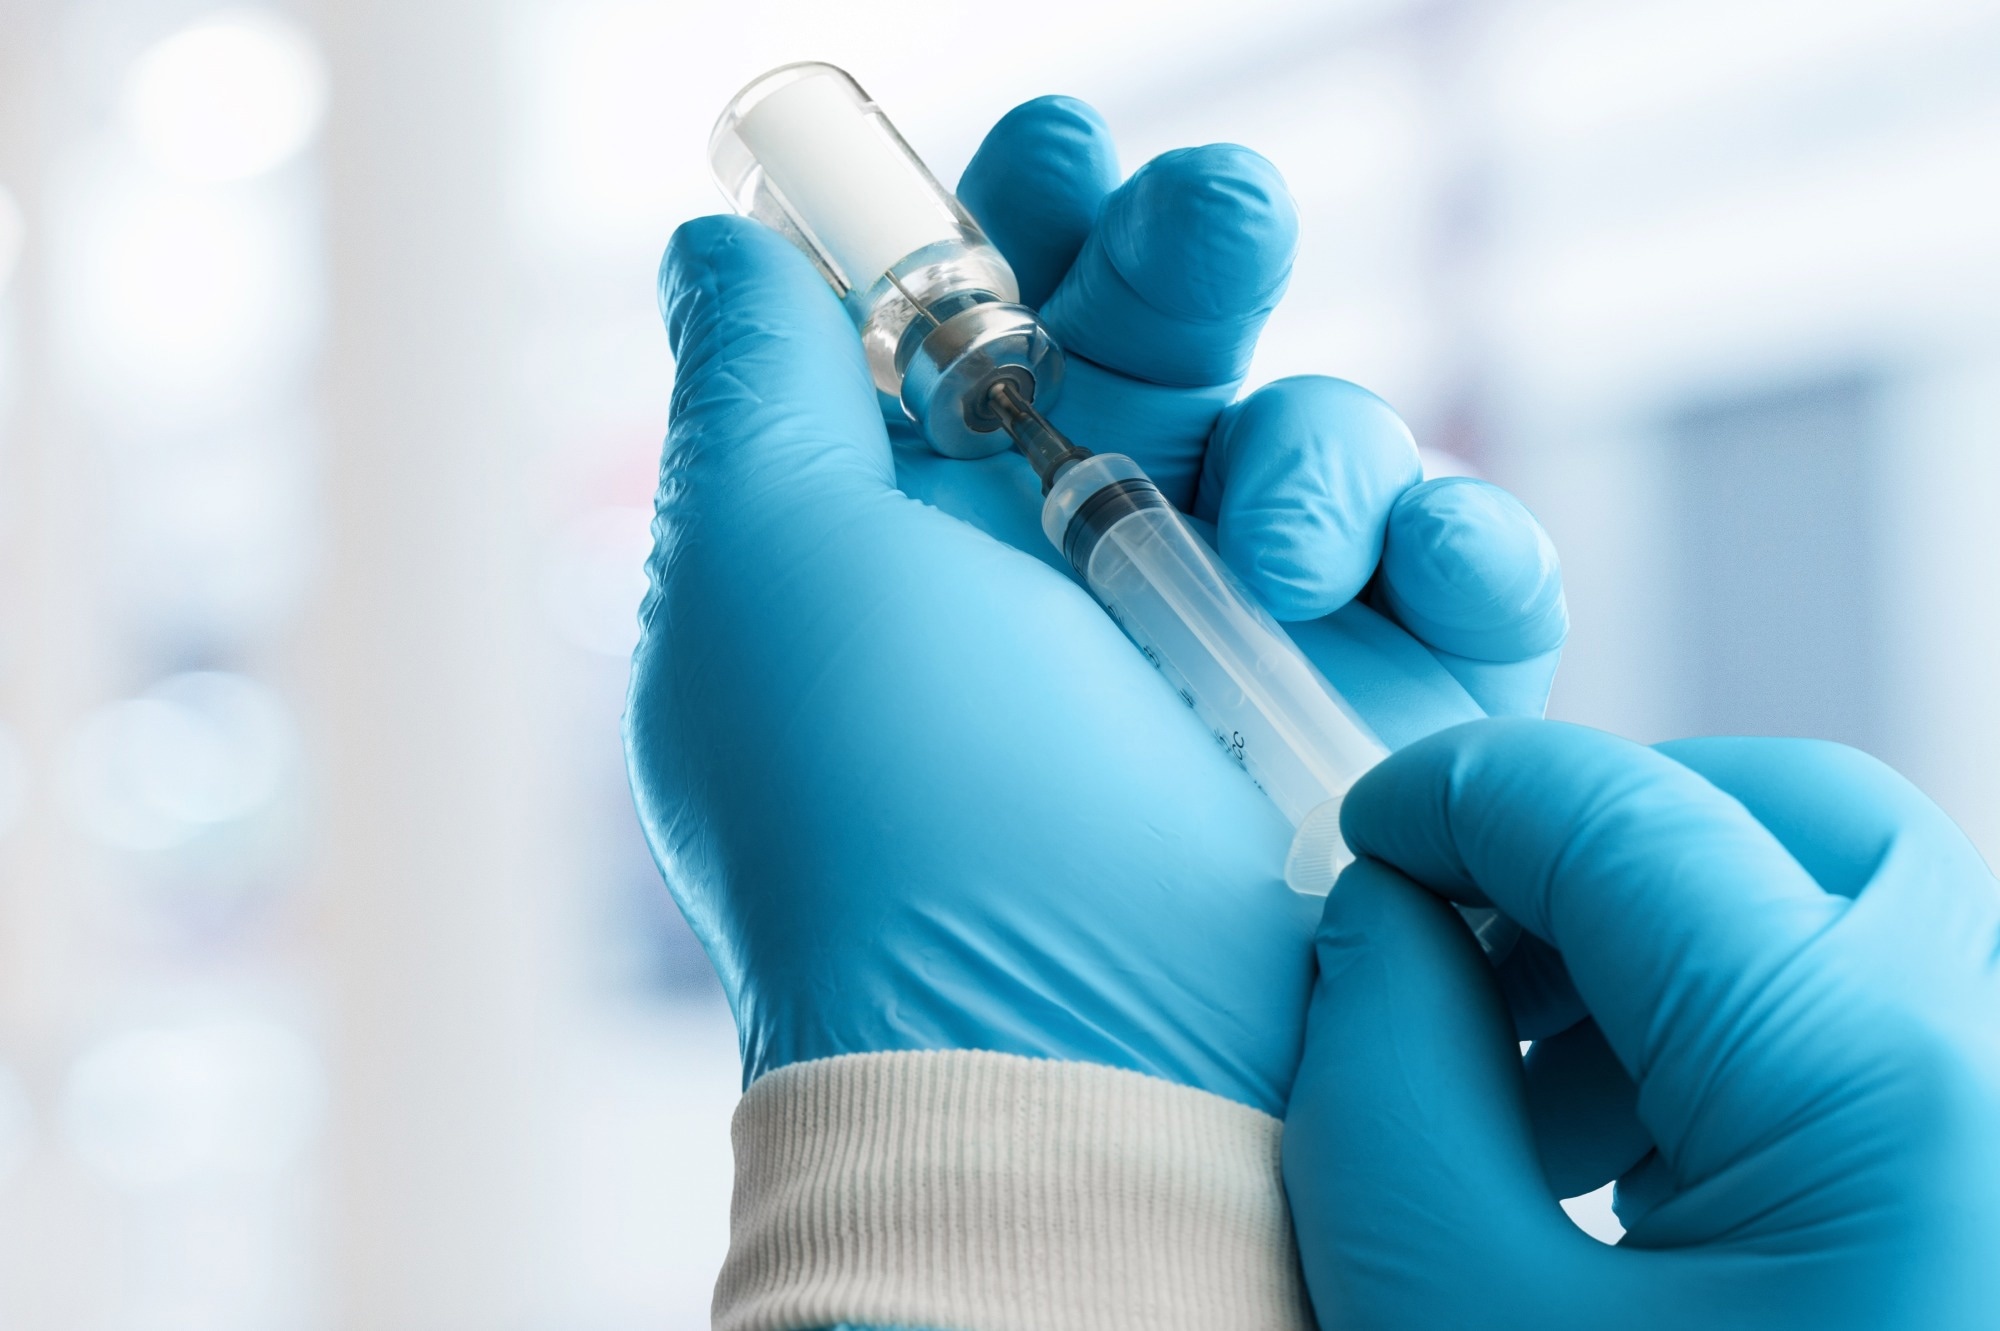 Review: Dose of approved COVID-19 vaccines is based on weak evidence: a review of early-phase, dose-finding trials. Image Credit: Billion Photos / Shutterstock